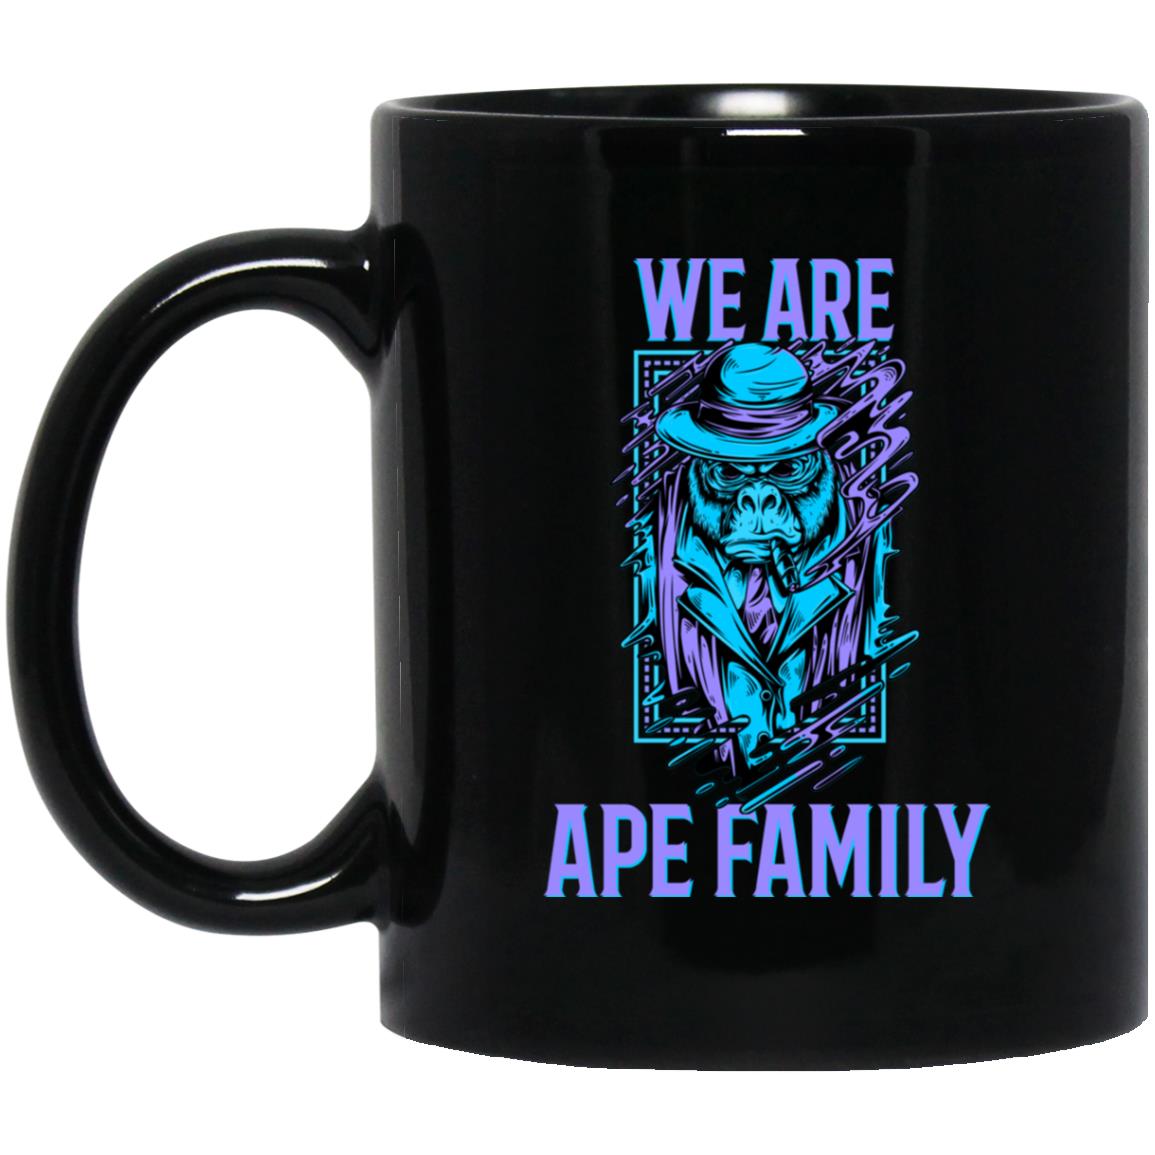 We Are Ape Family - Cups Mugs Black, White & Color-Changing